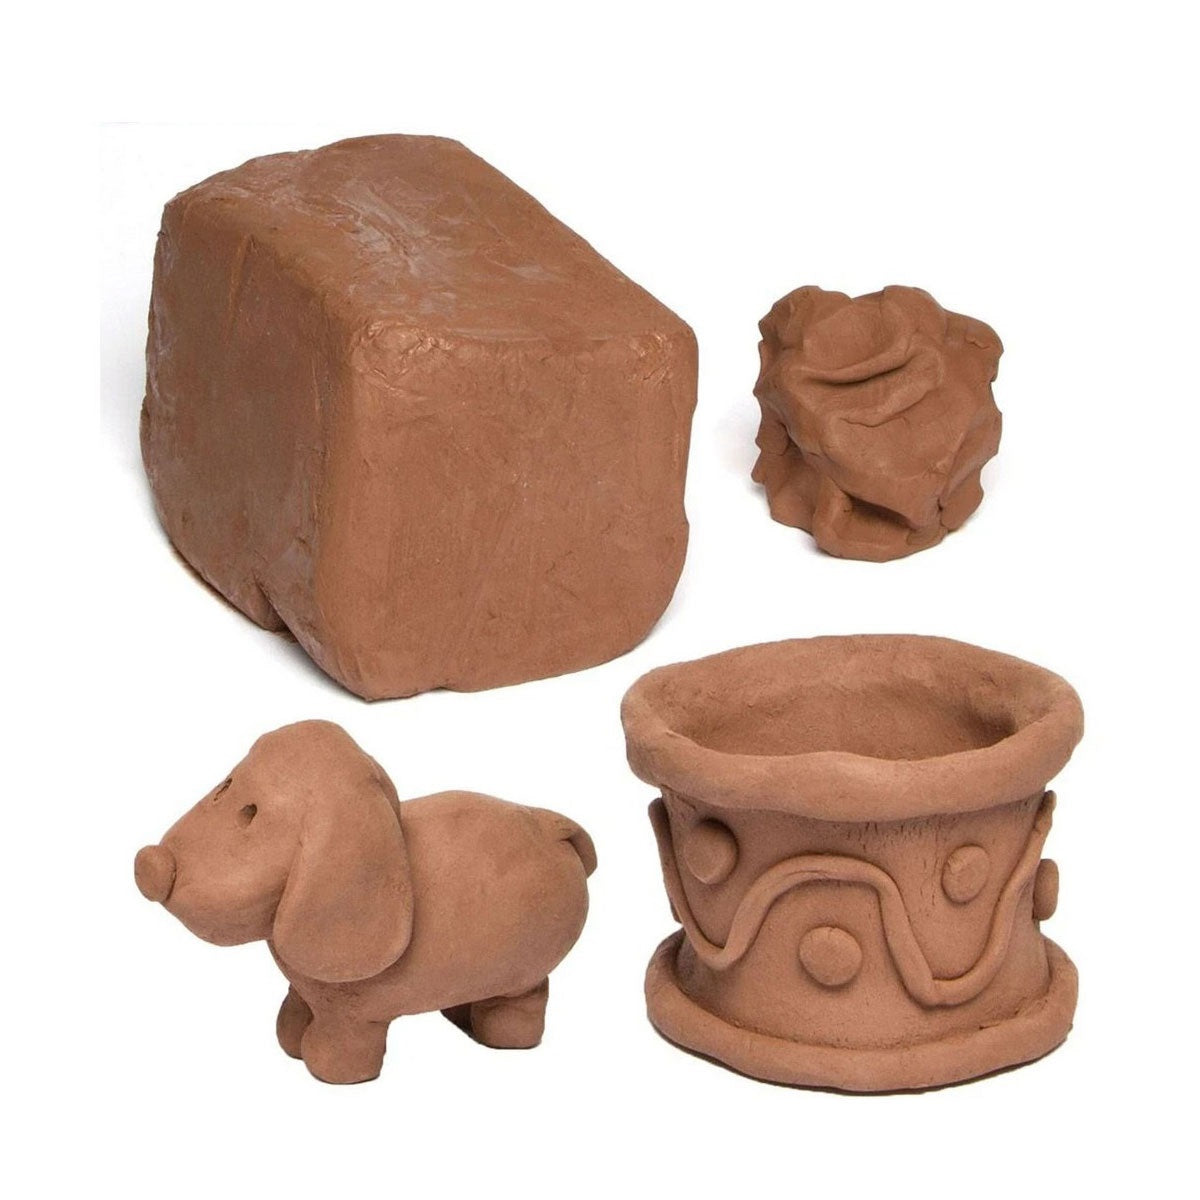 Modelling Refined clay for Sculptures or Potry for kid - Chikni Mitti 1kg